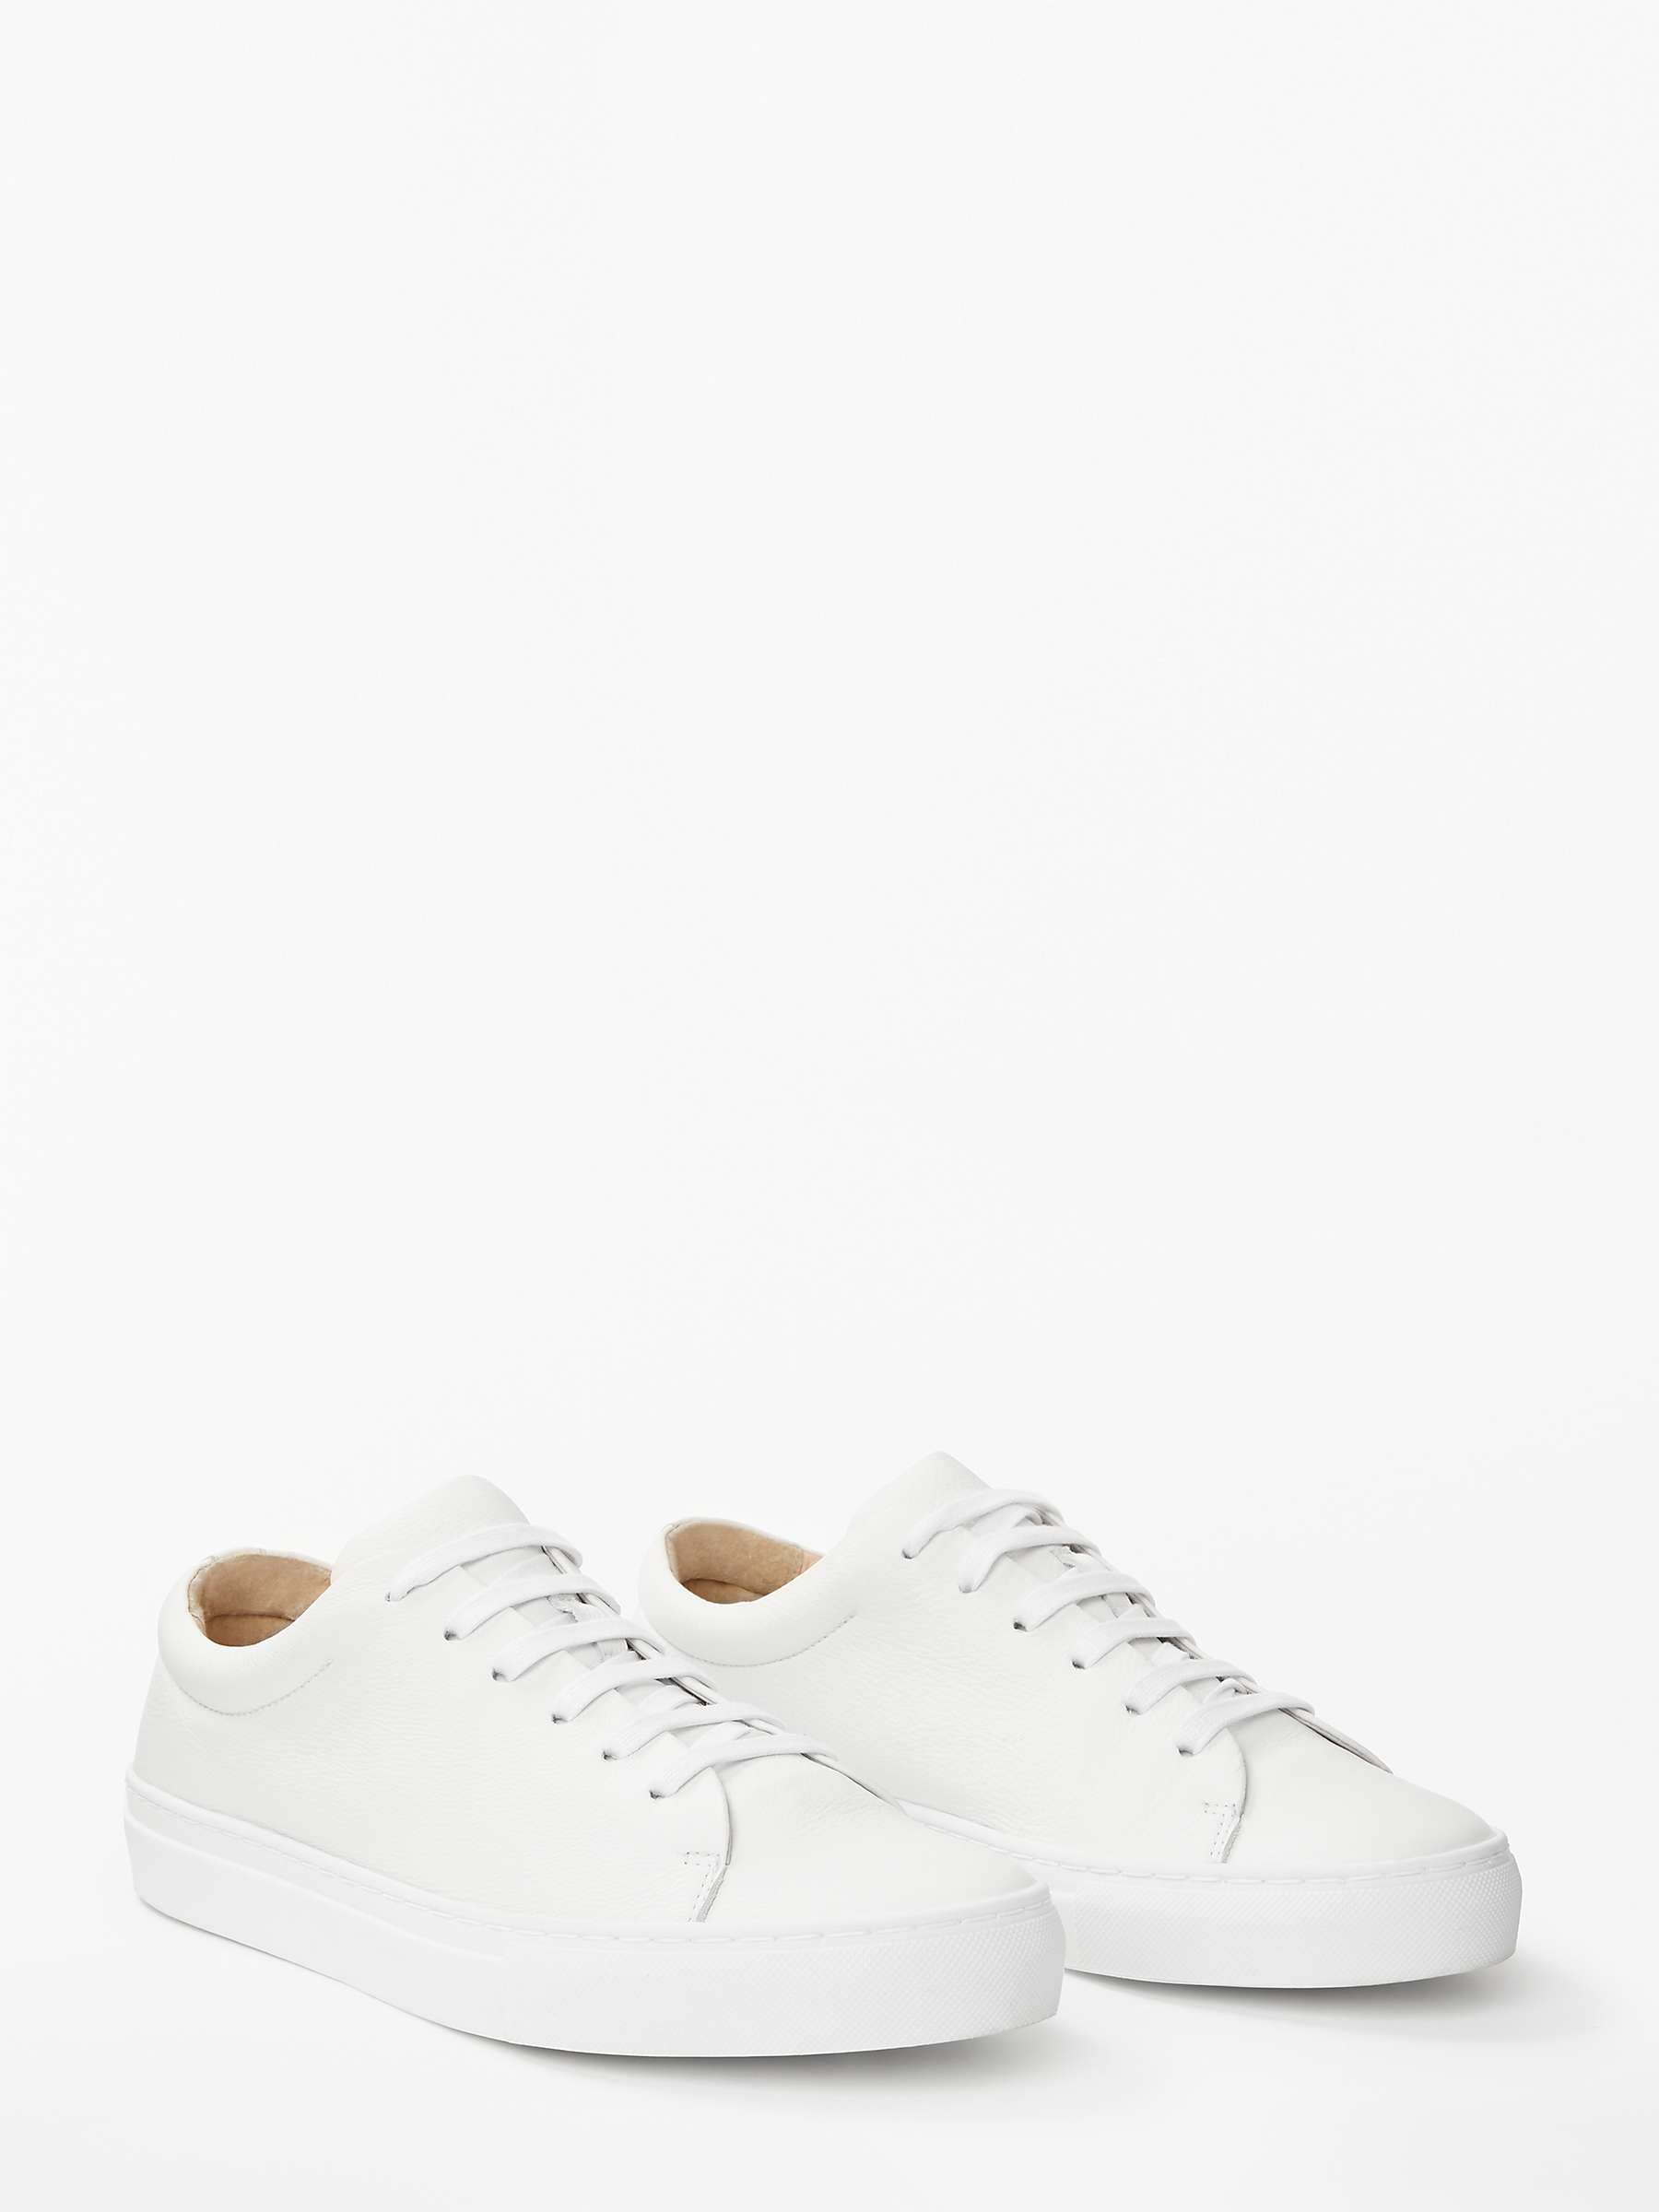 Buy John Lewis Flora Lace Up Trainers, White Leather Online at johnlewis.com